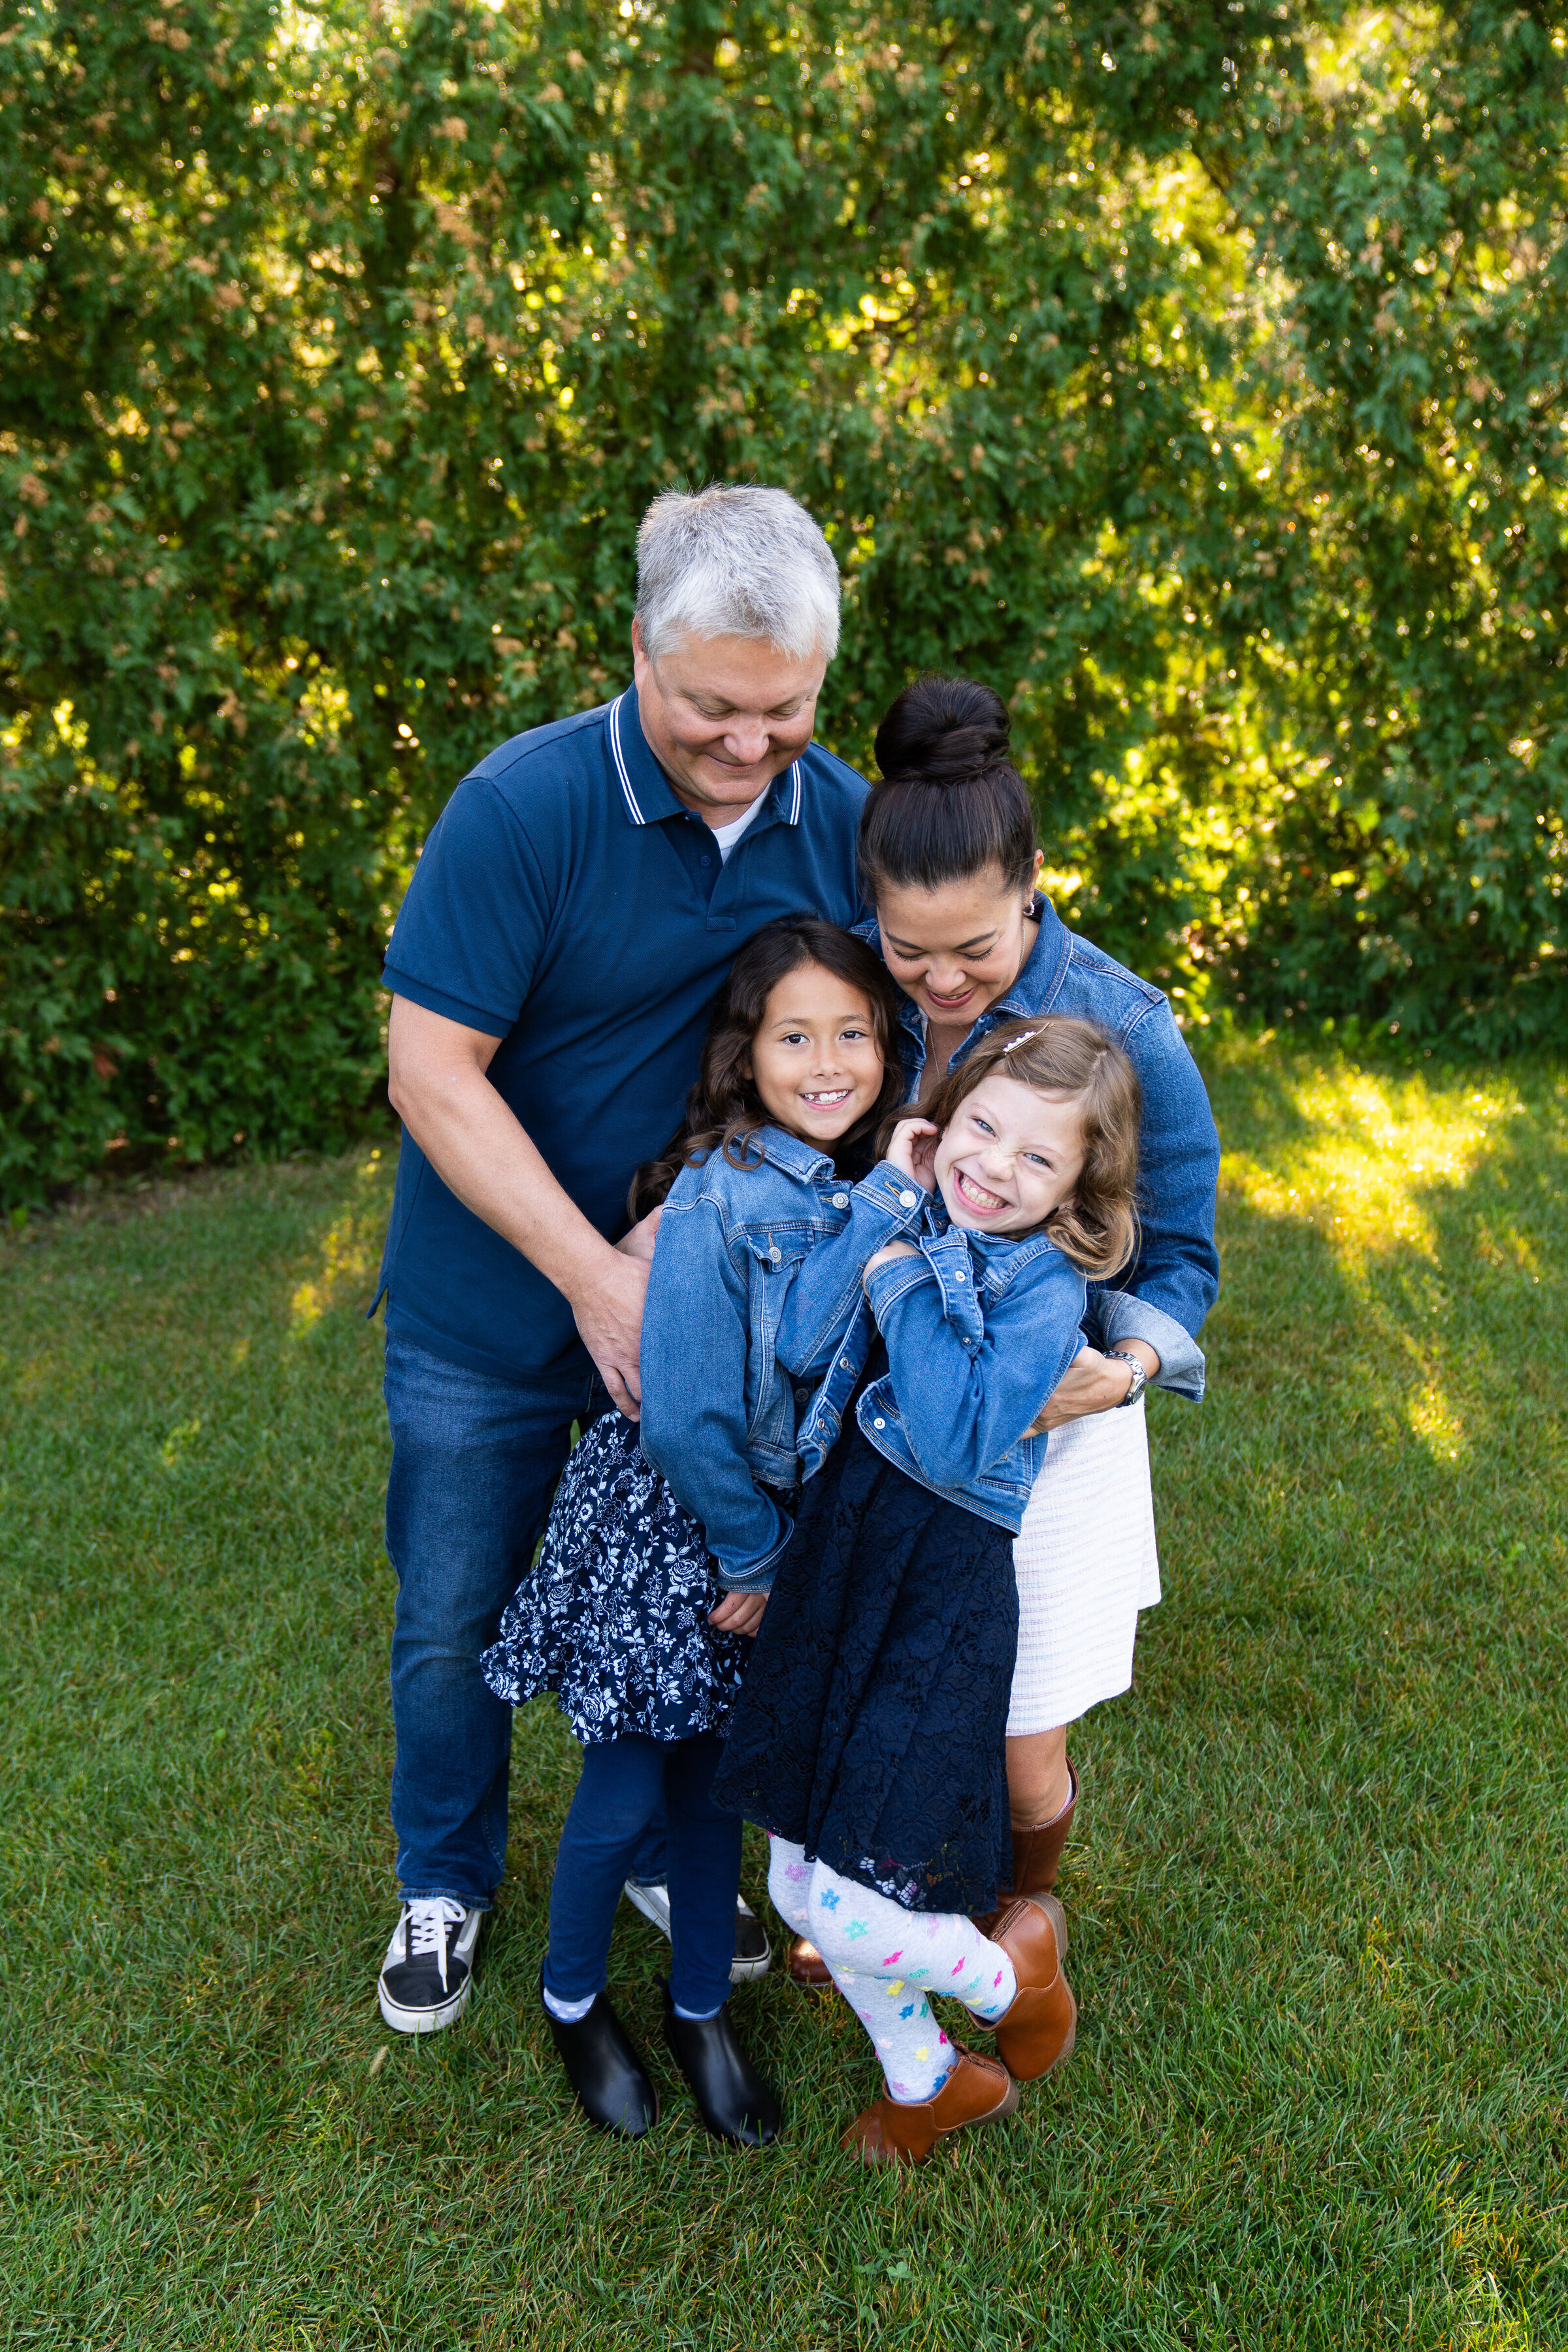 A mom and dad tickle their daughters during their family photo shoot.